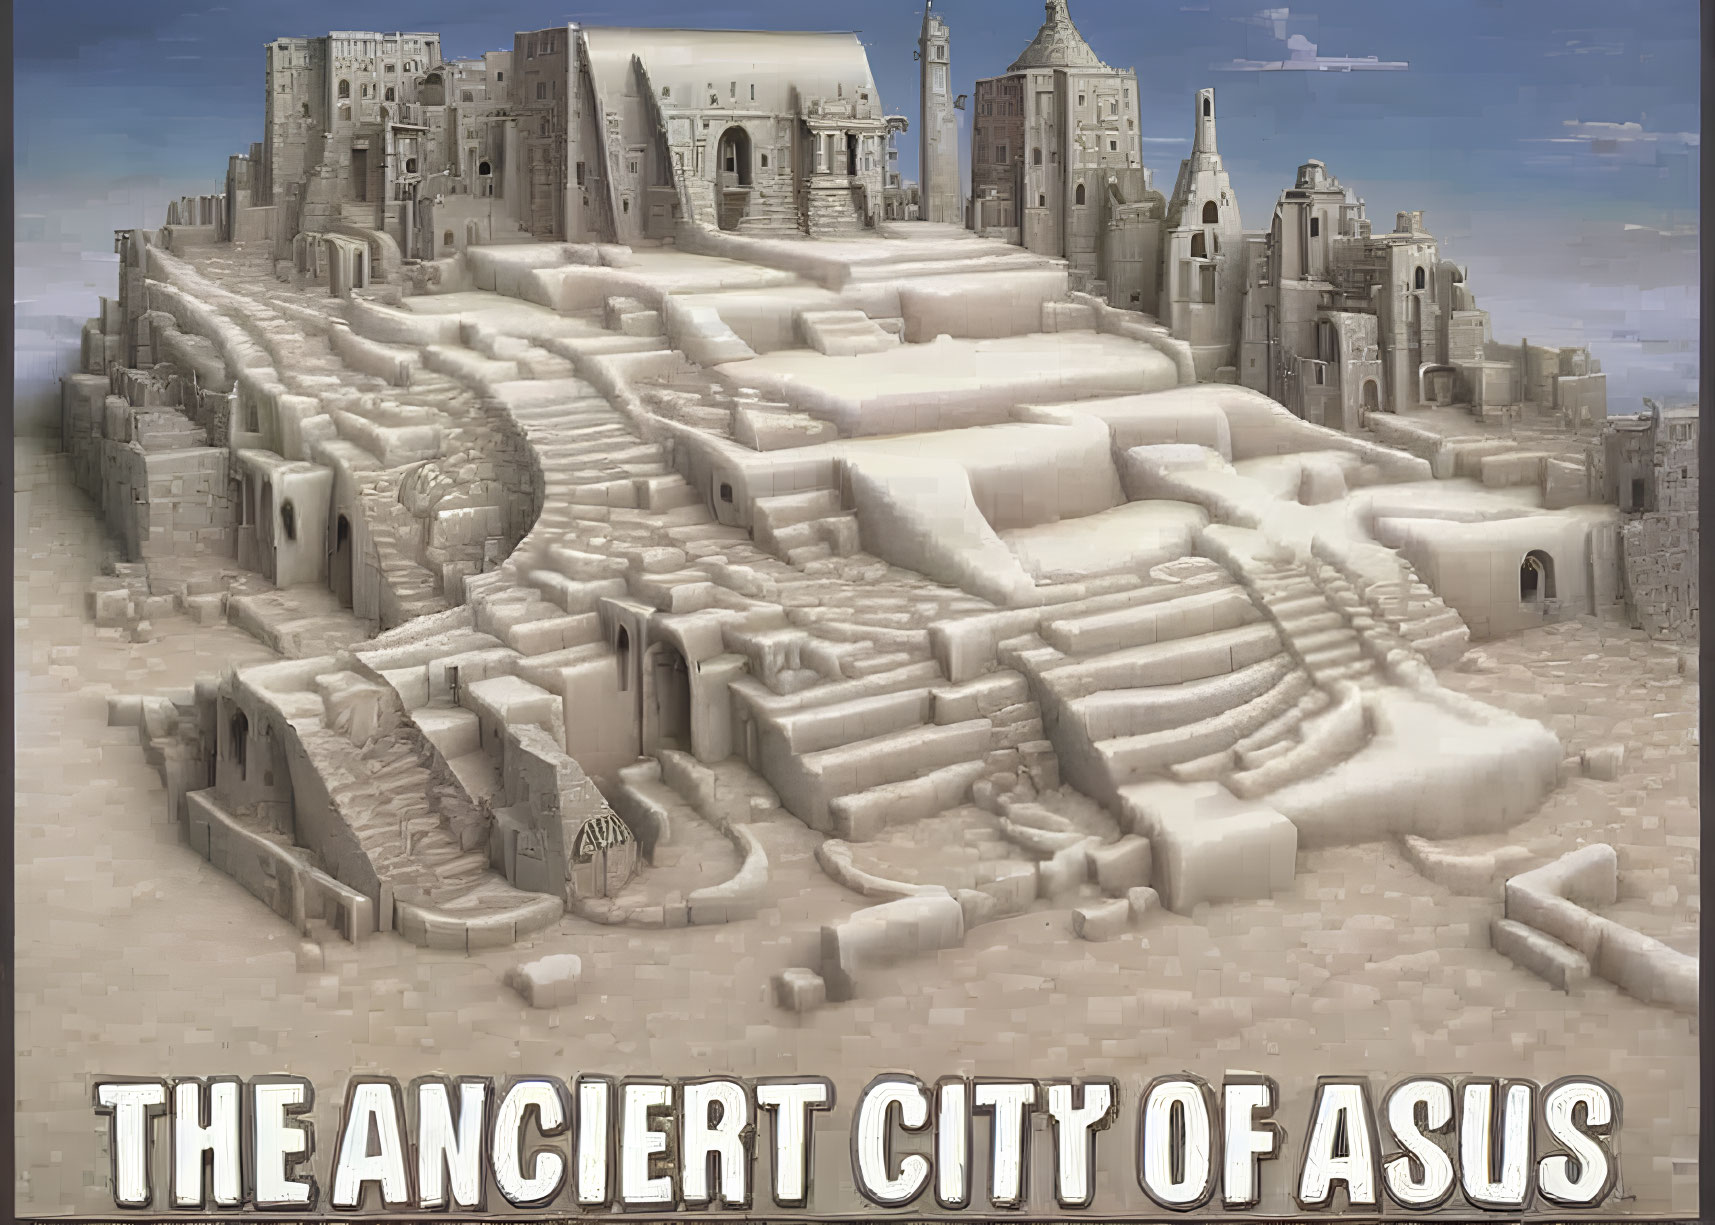 Illustrated fantasy city in desert hillside with ancient sandstone structures - "The Ancient City of Asus